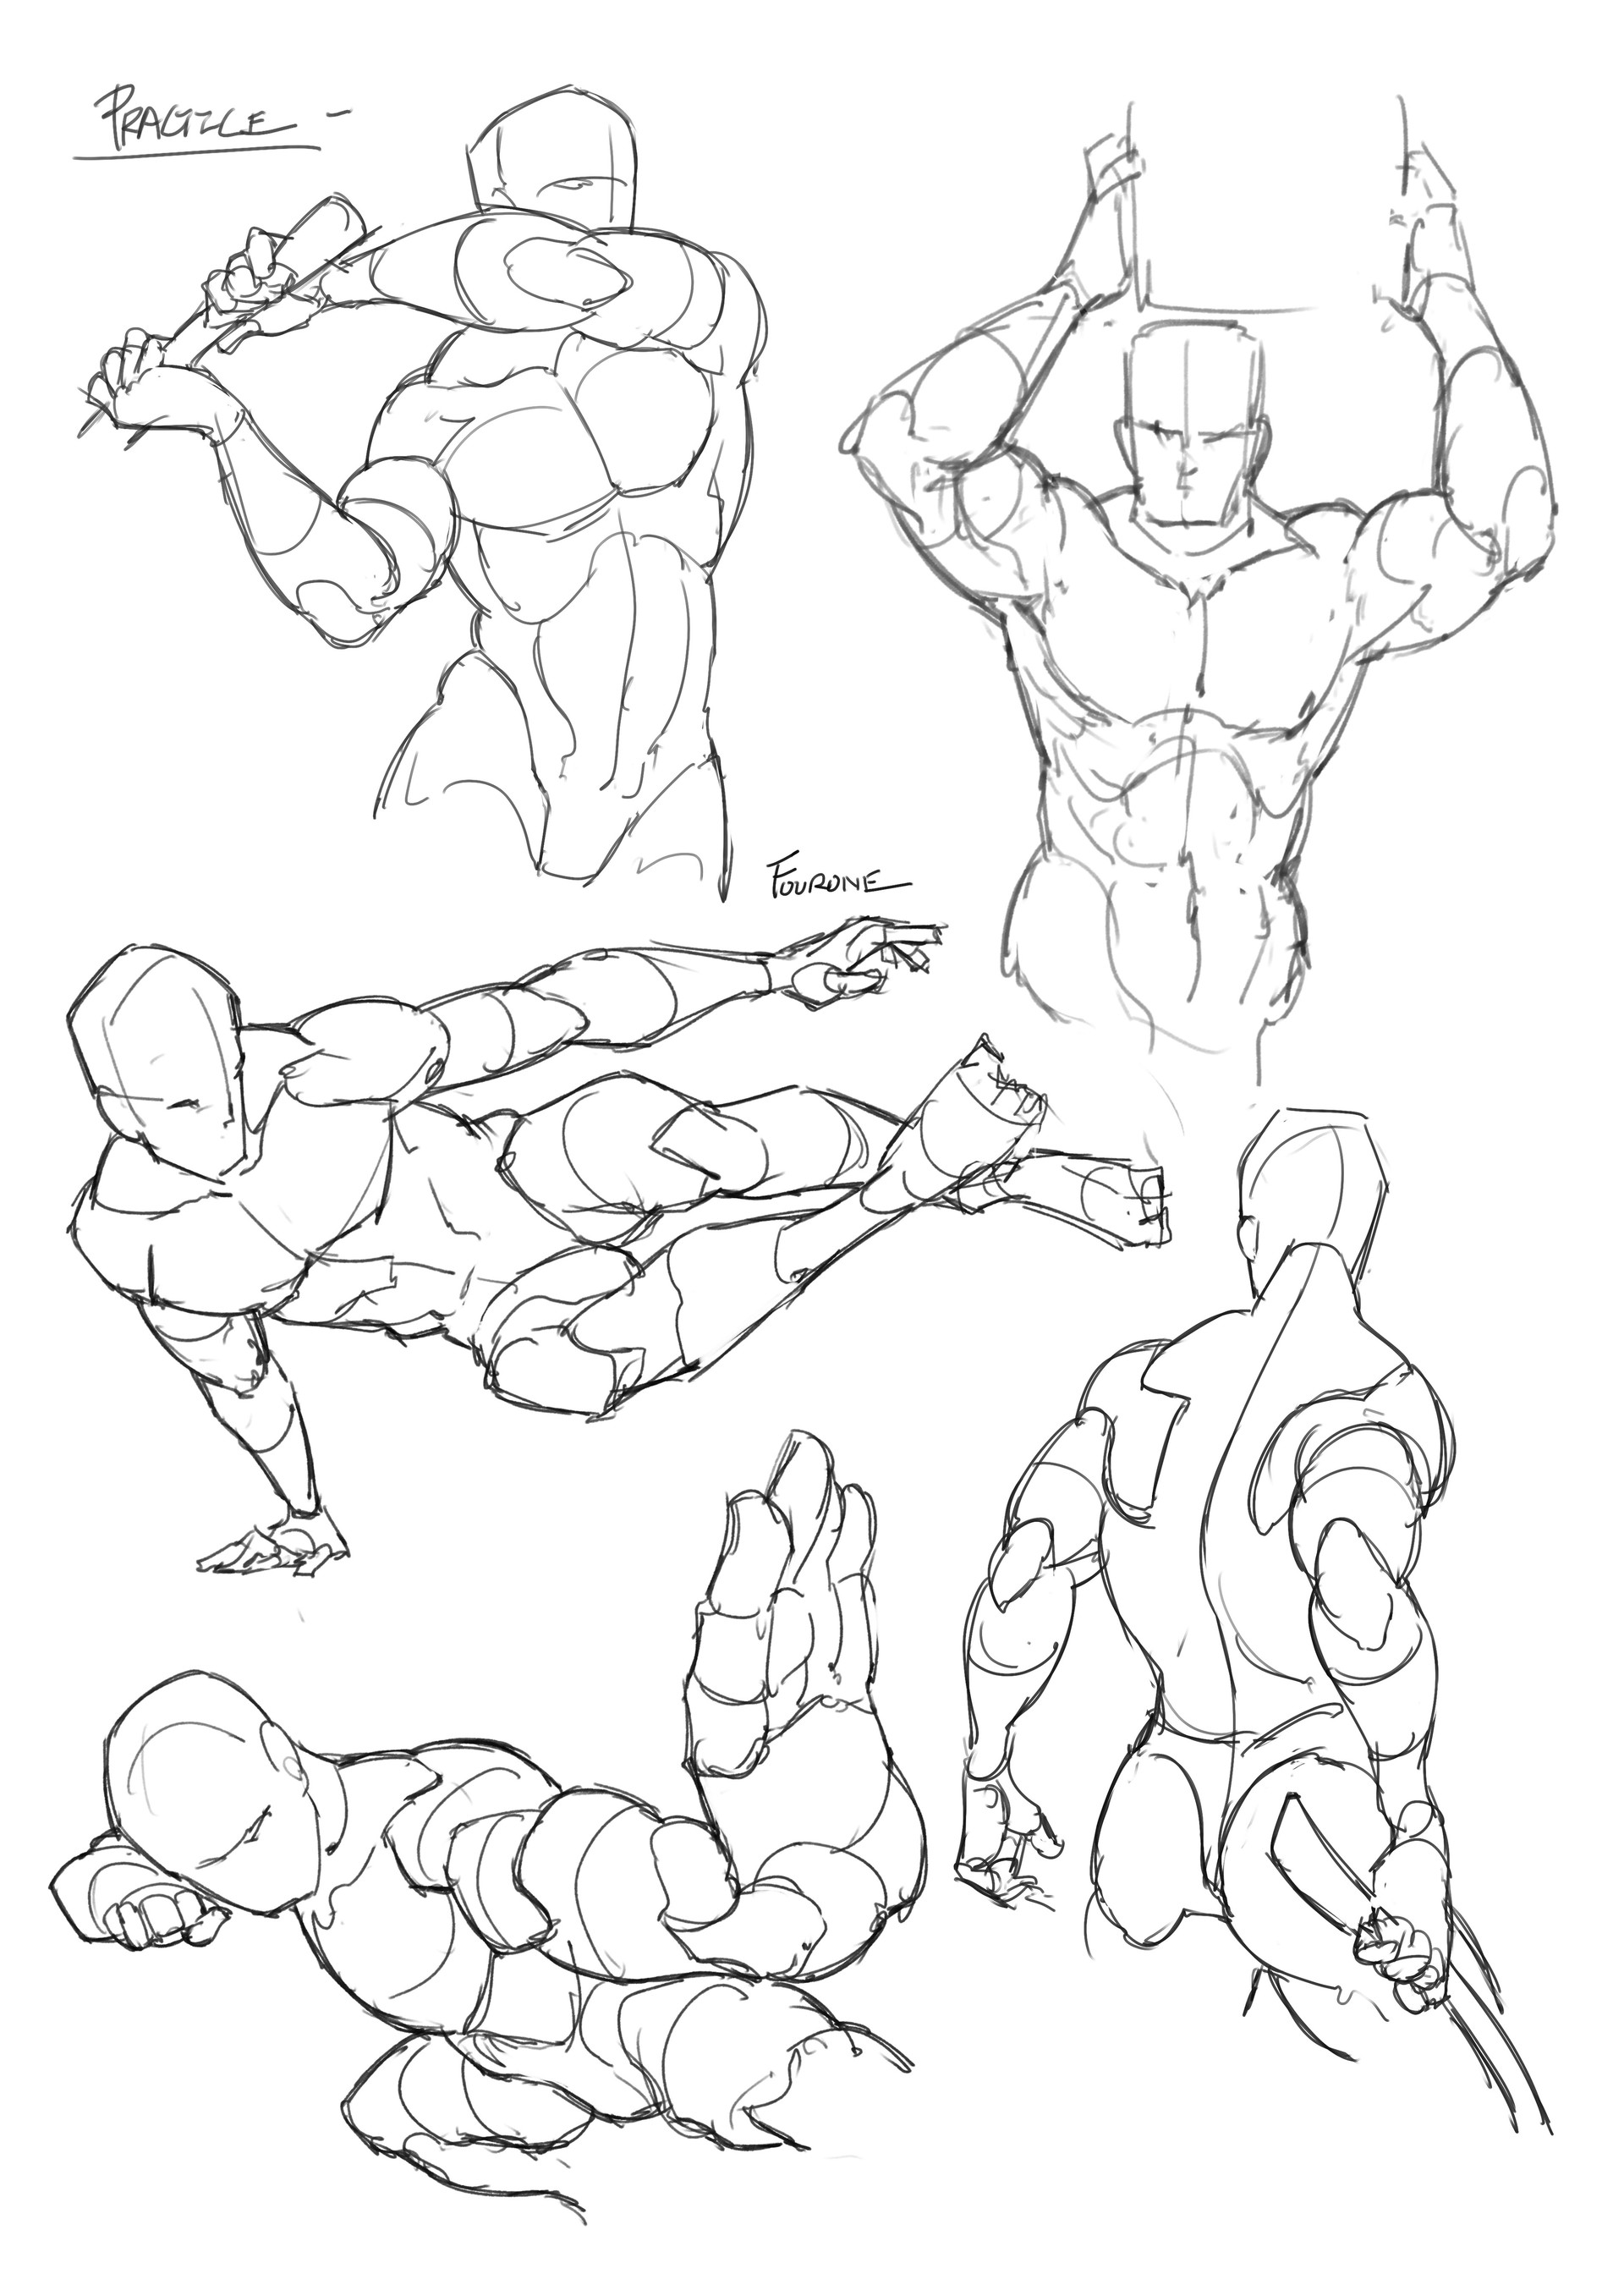 Anime anatomy practice one day Ill reach the level of the artists Im  referencing  rAnimeSketch